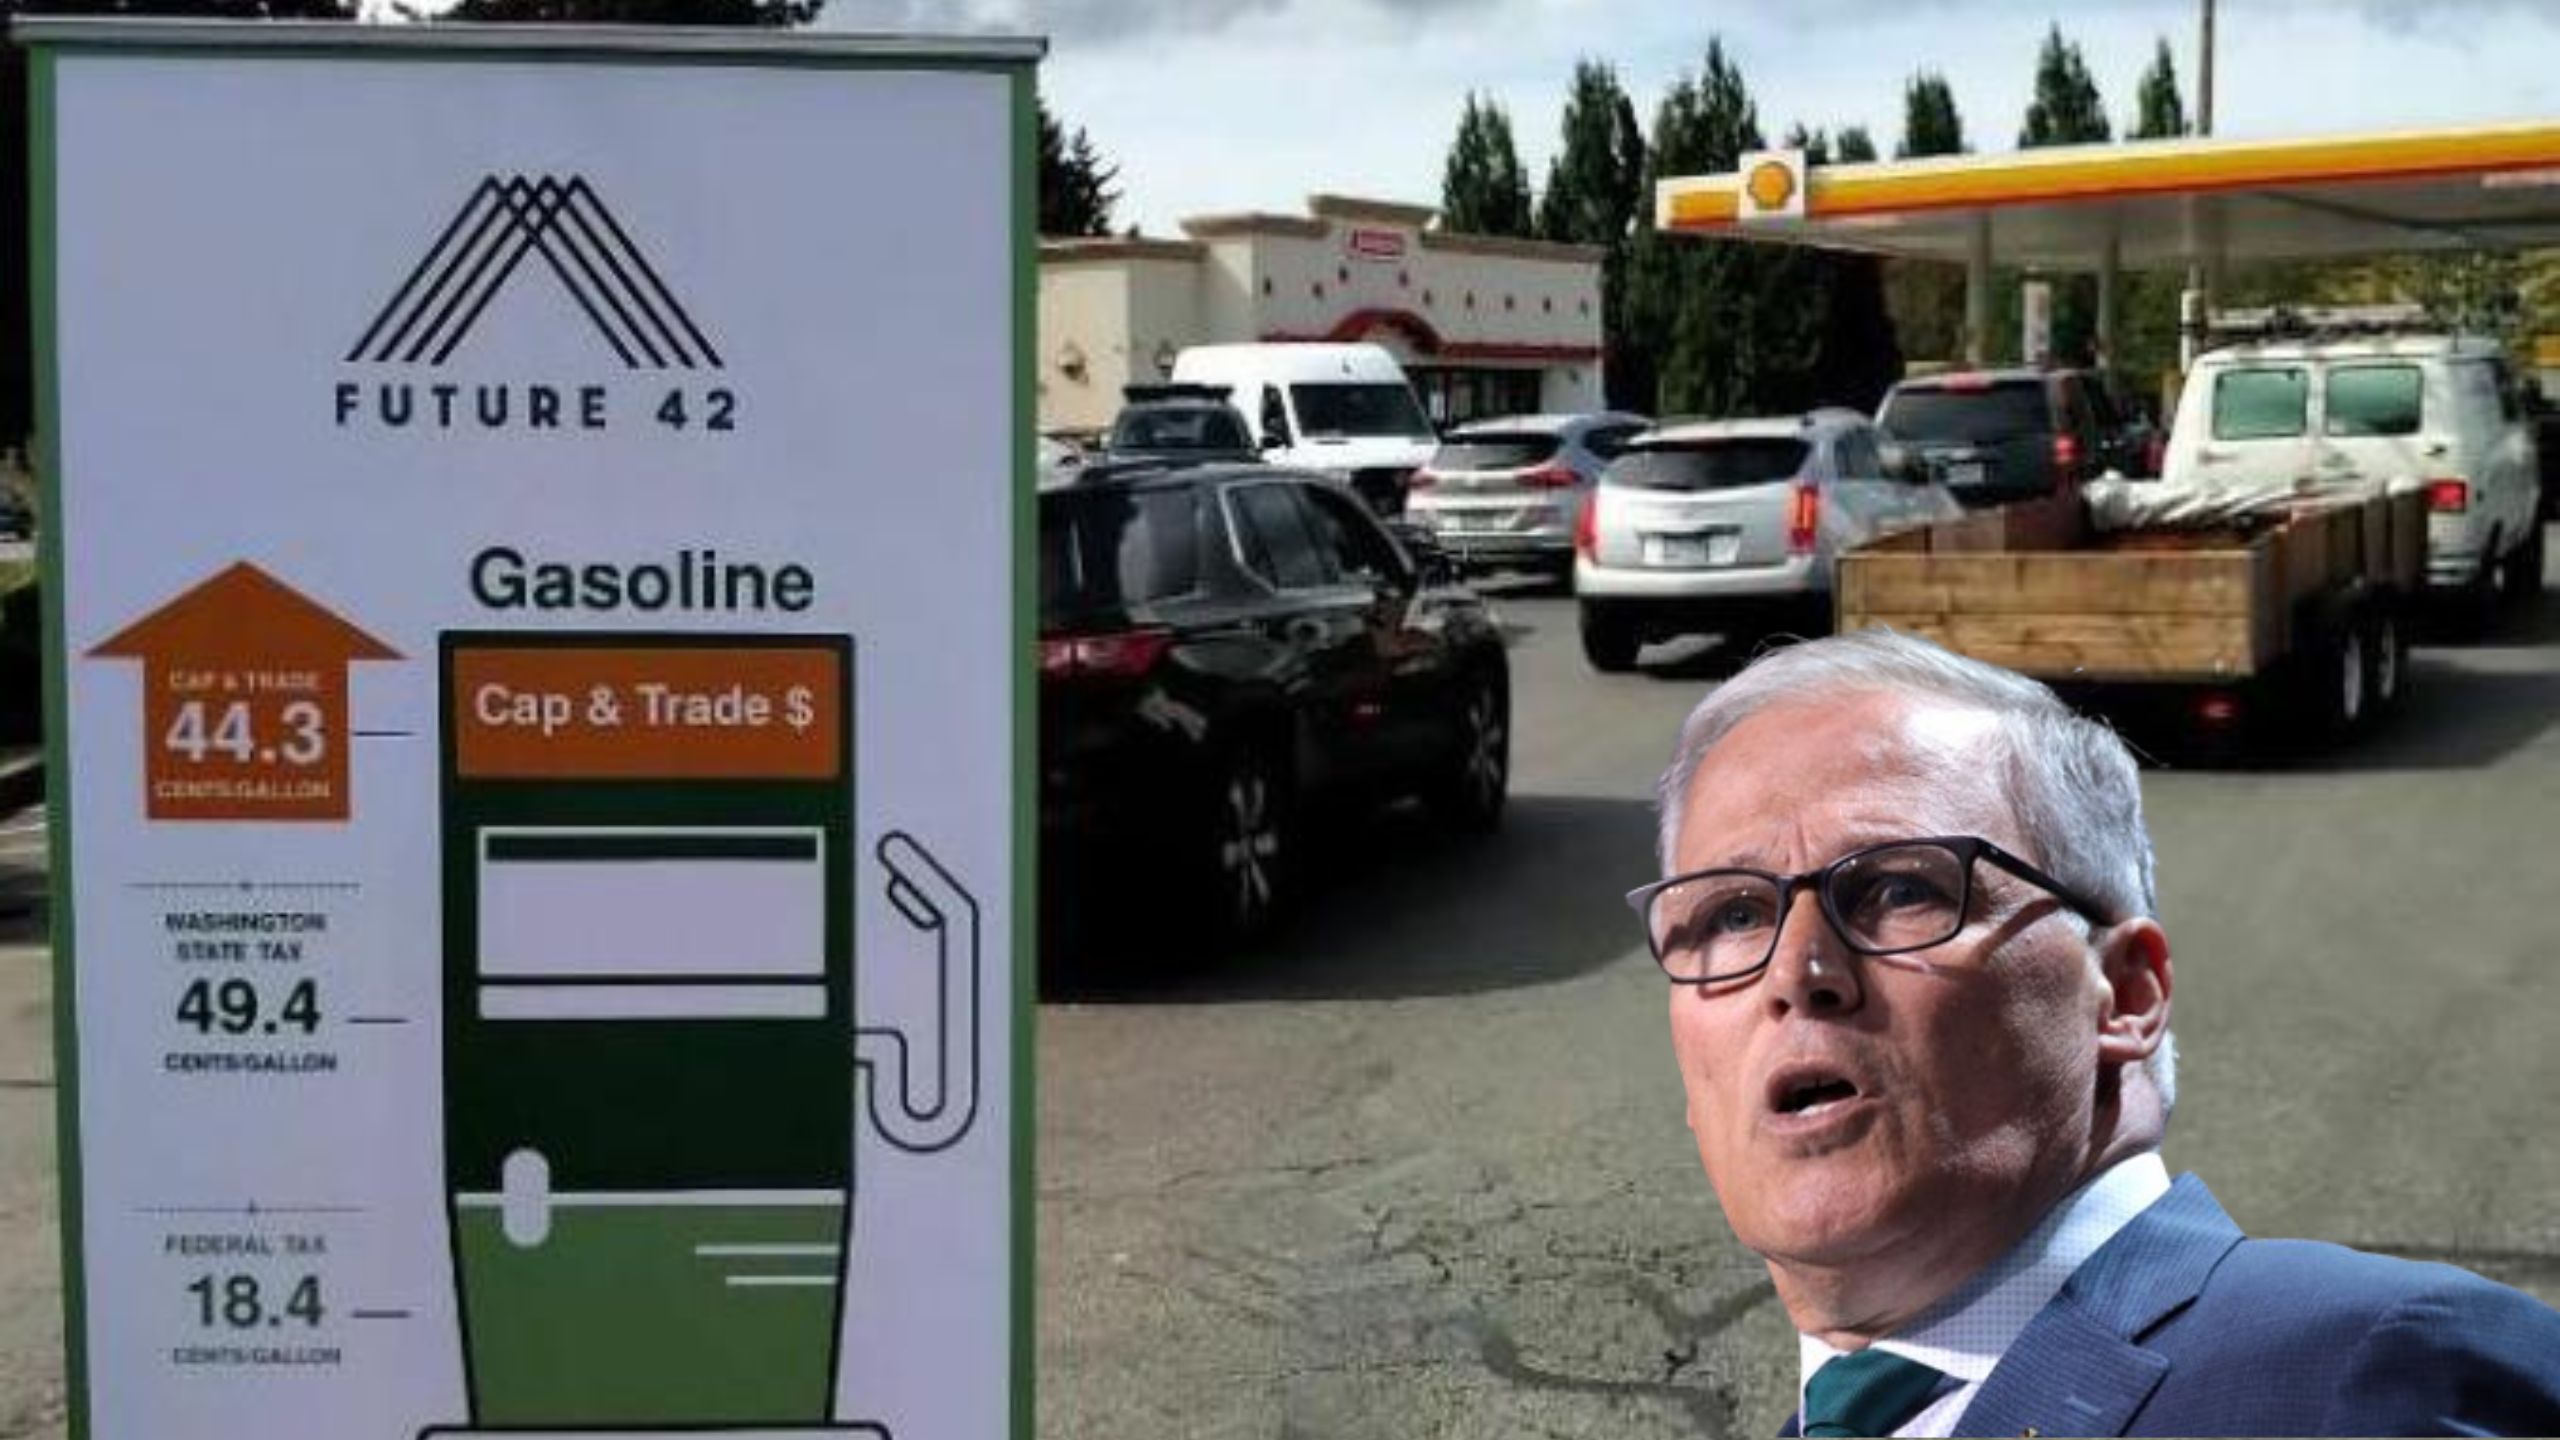 Seattle-area gas station drops prices by over $2 to protest state carbon tax